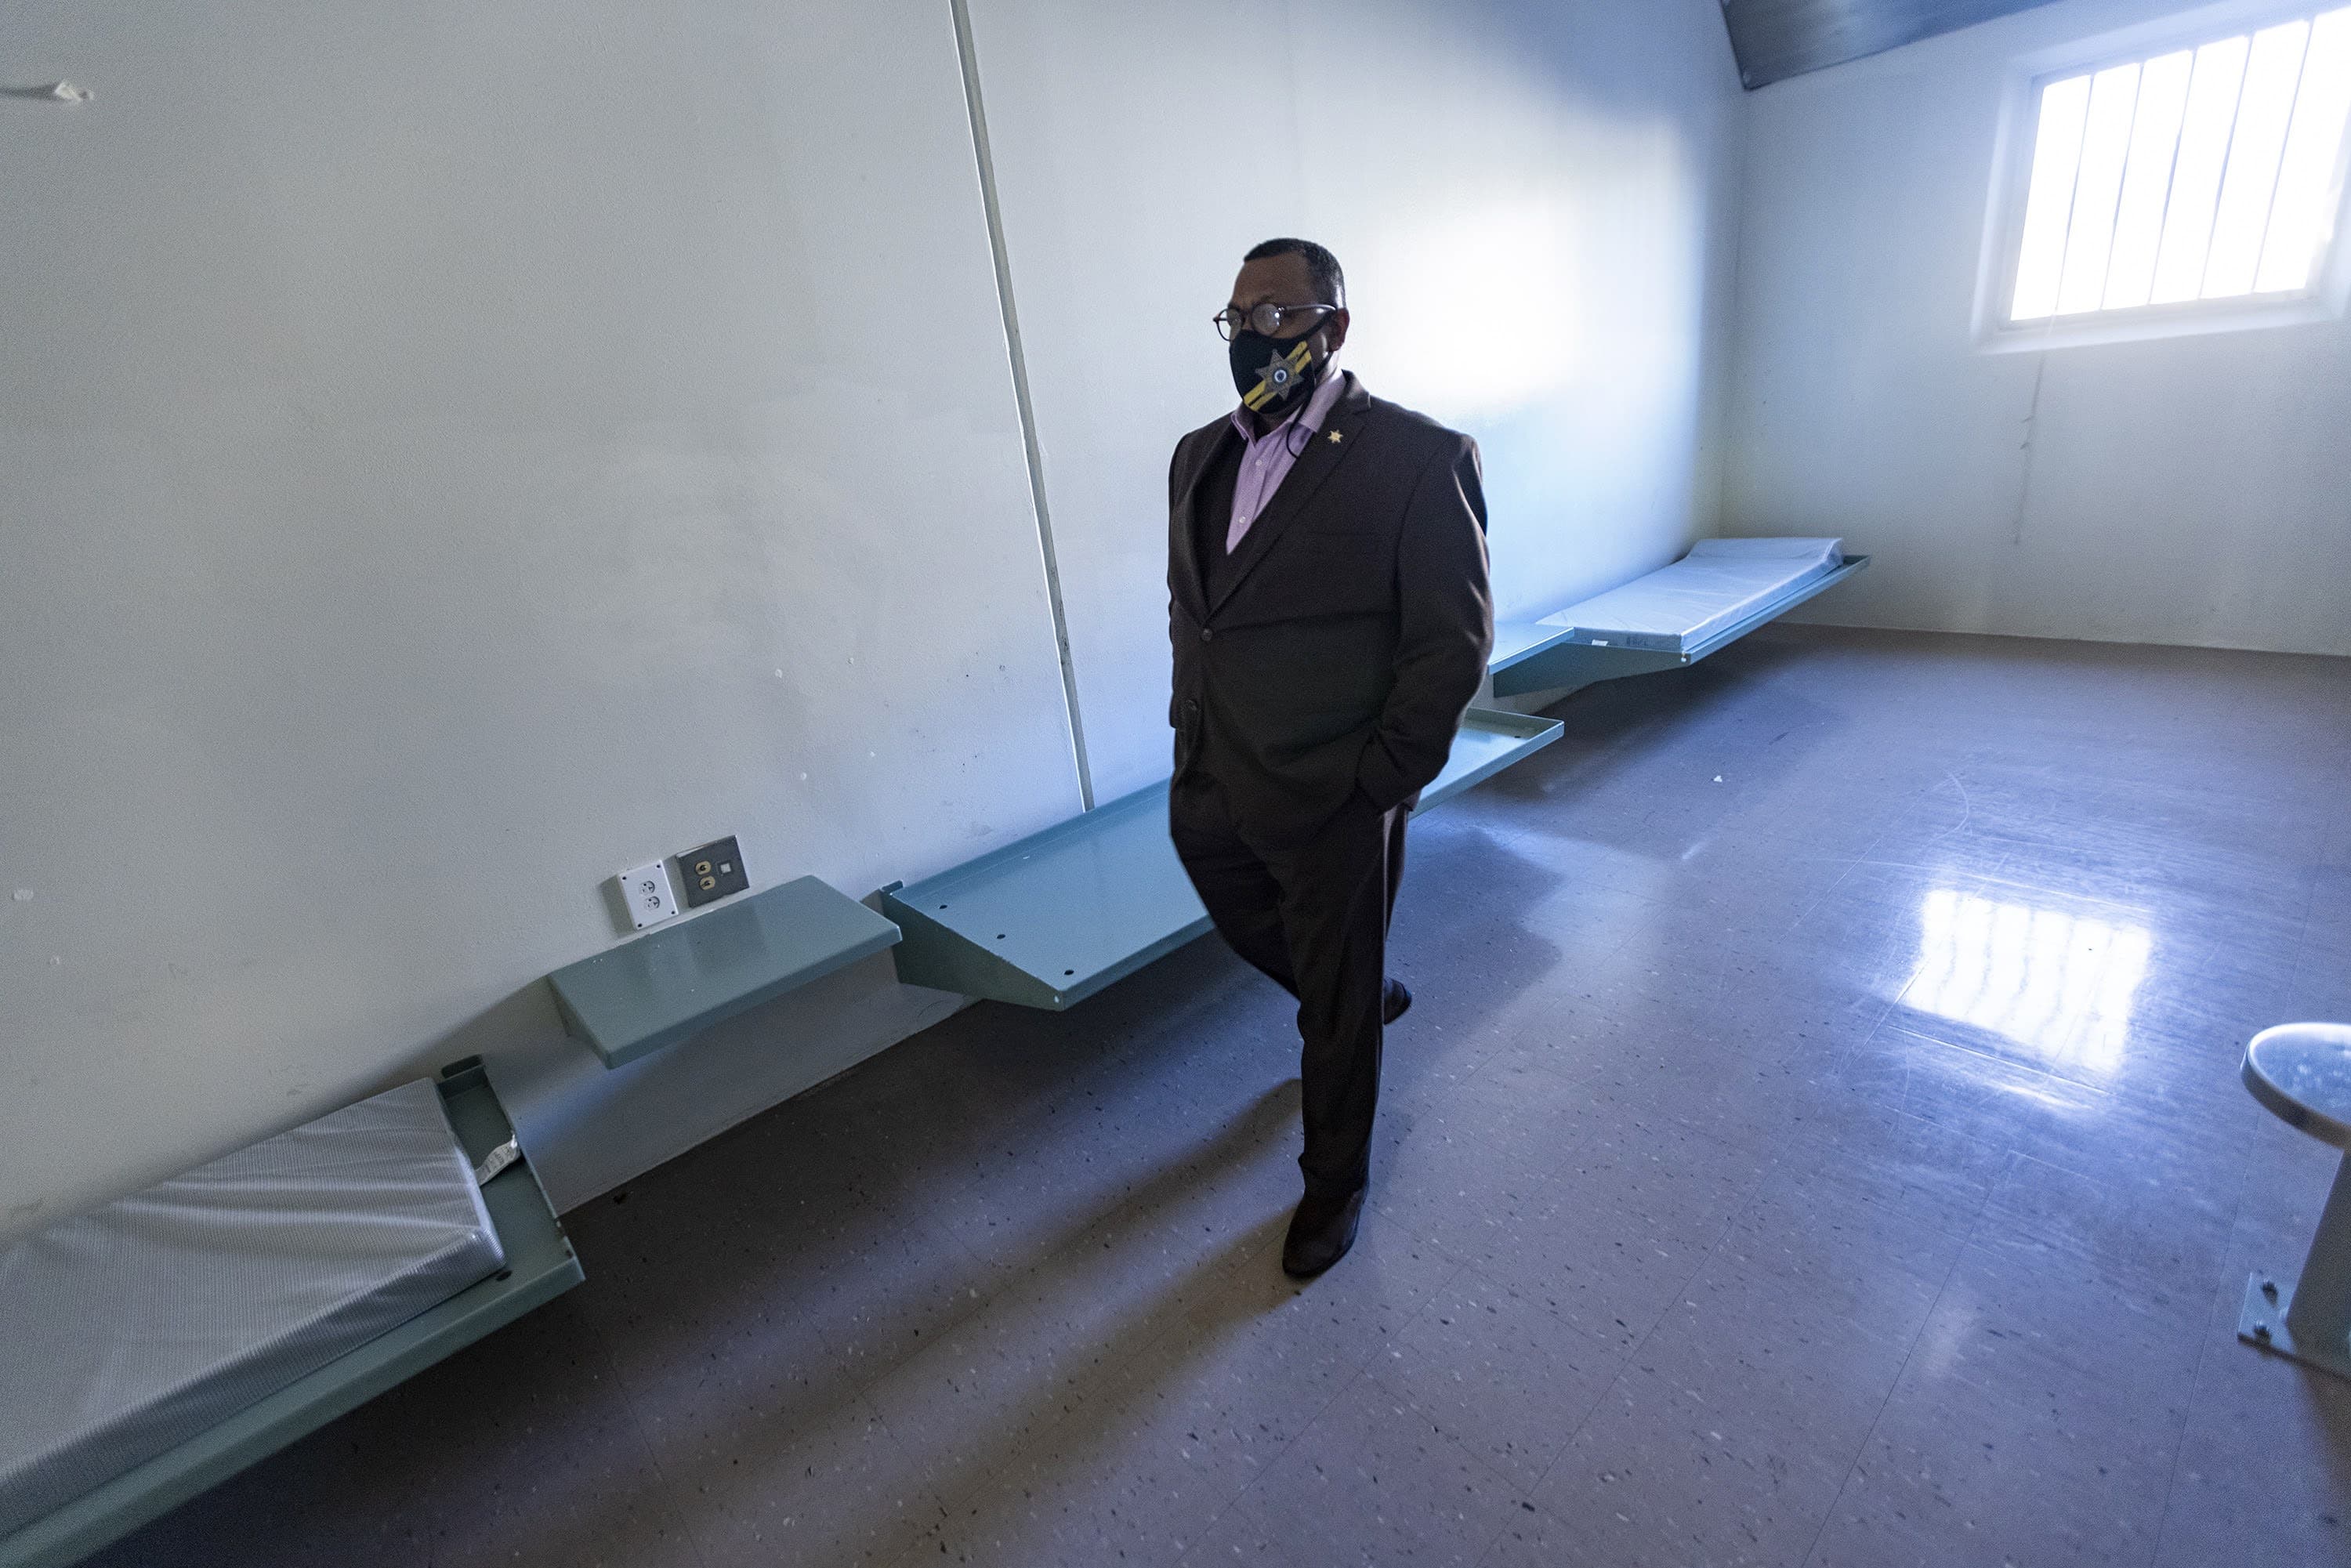 Sheriff Steven Tompkins walks through one of the jail cells he says will be turned into a room that will house some people without homes who live in tents around Boston's so-called &quot;Mass. and Cass&quot; area. (Jesse Costa/WBUR)